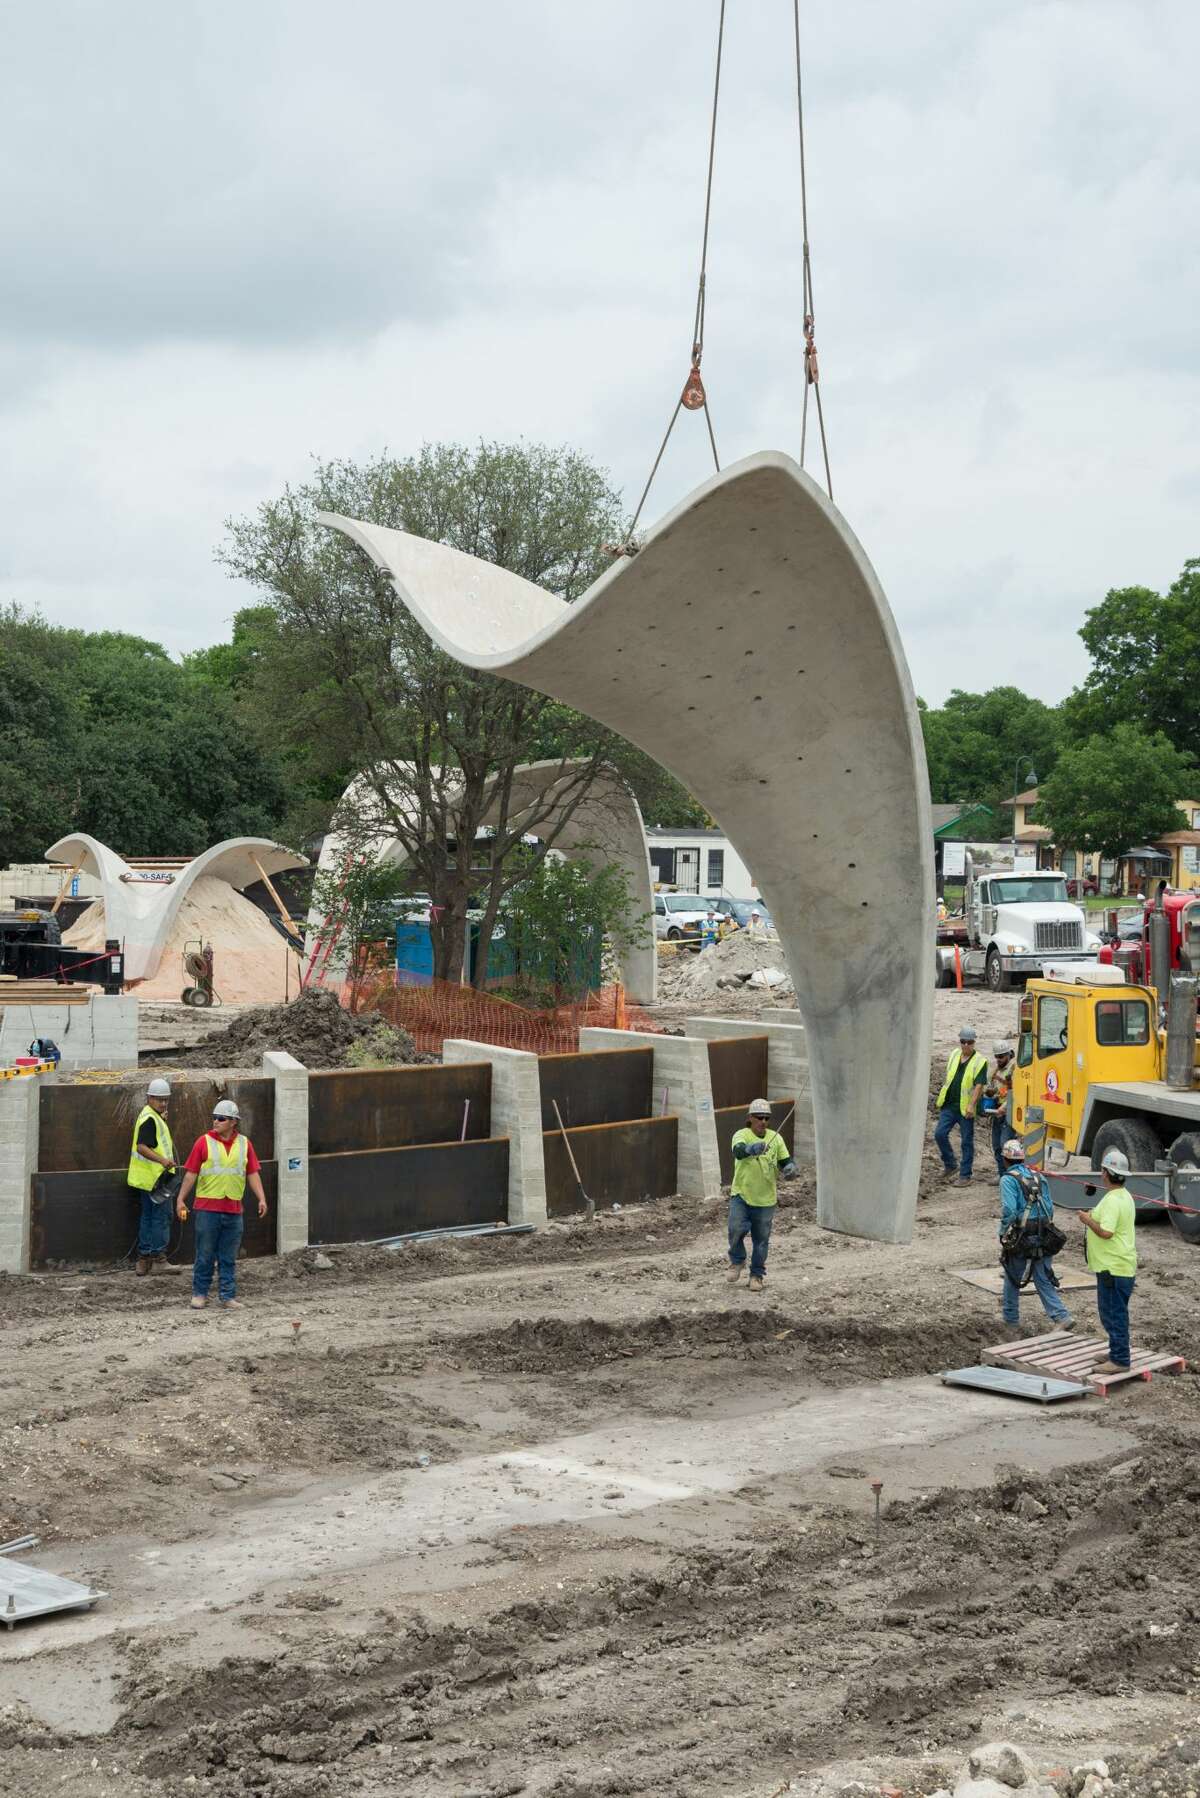 Photos show a crane placing part of a pavilion in Confluence Park in July 2017.